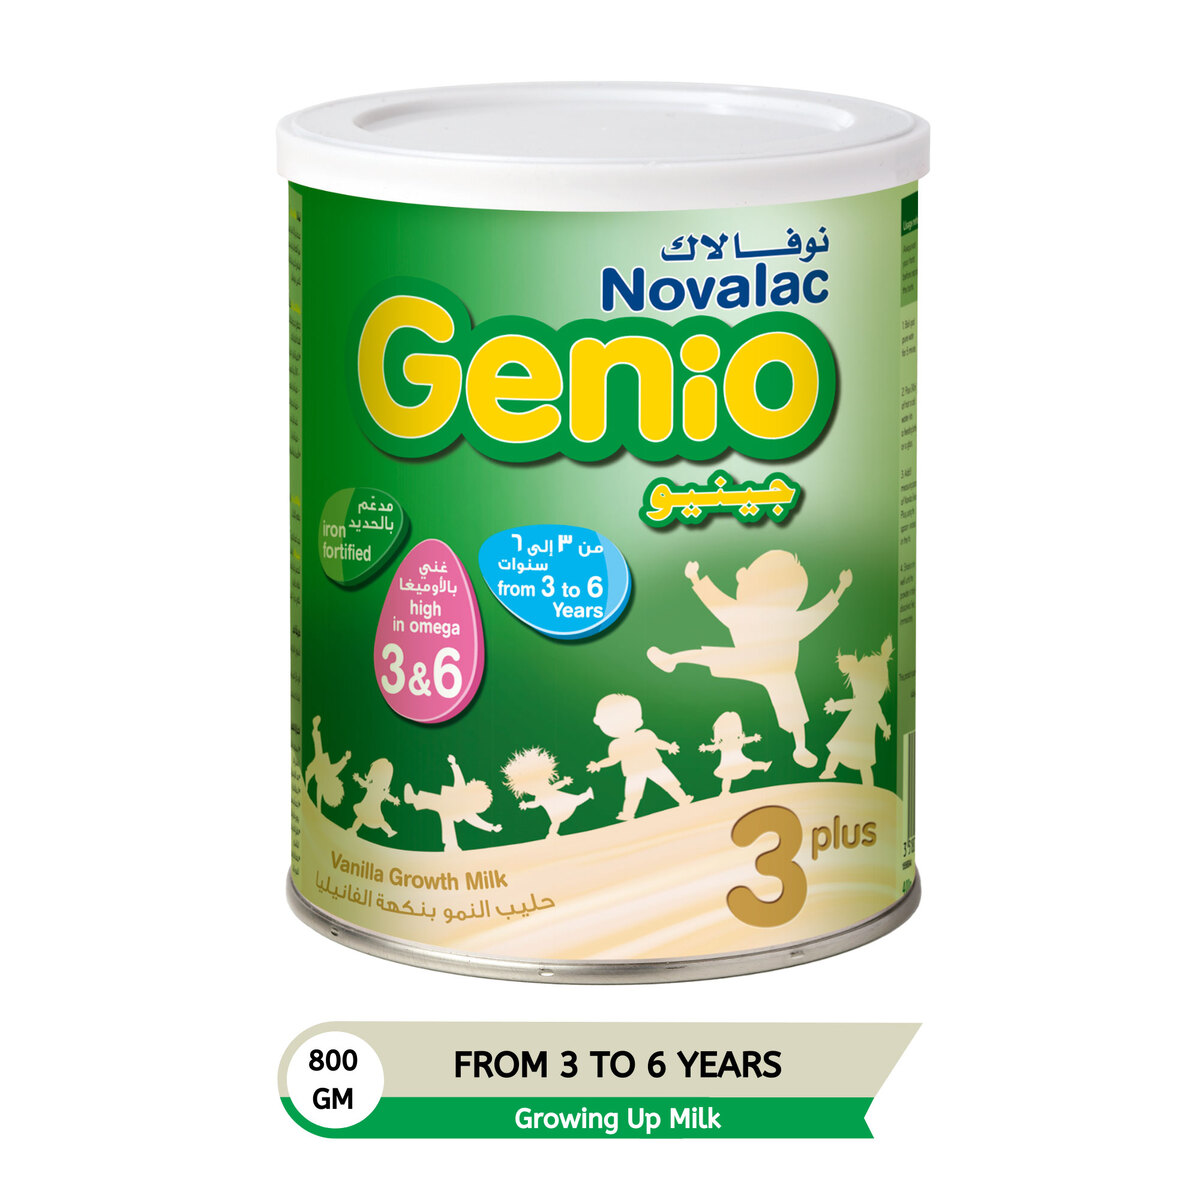 Novalac Genio 3 Plus Growing Up Formula From 3-6 Years 800 g